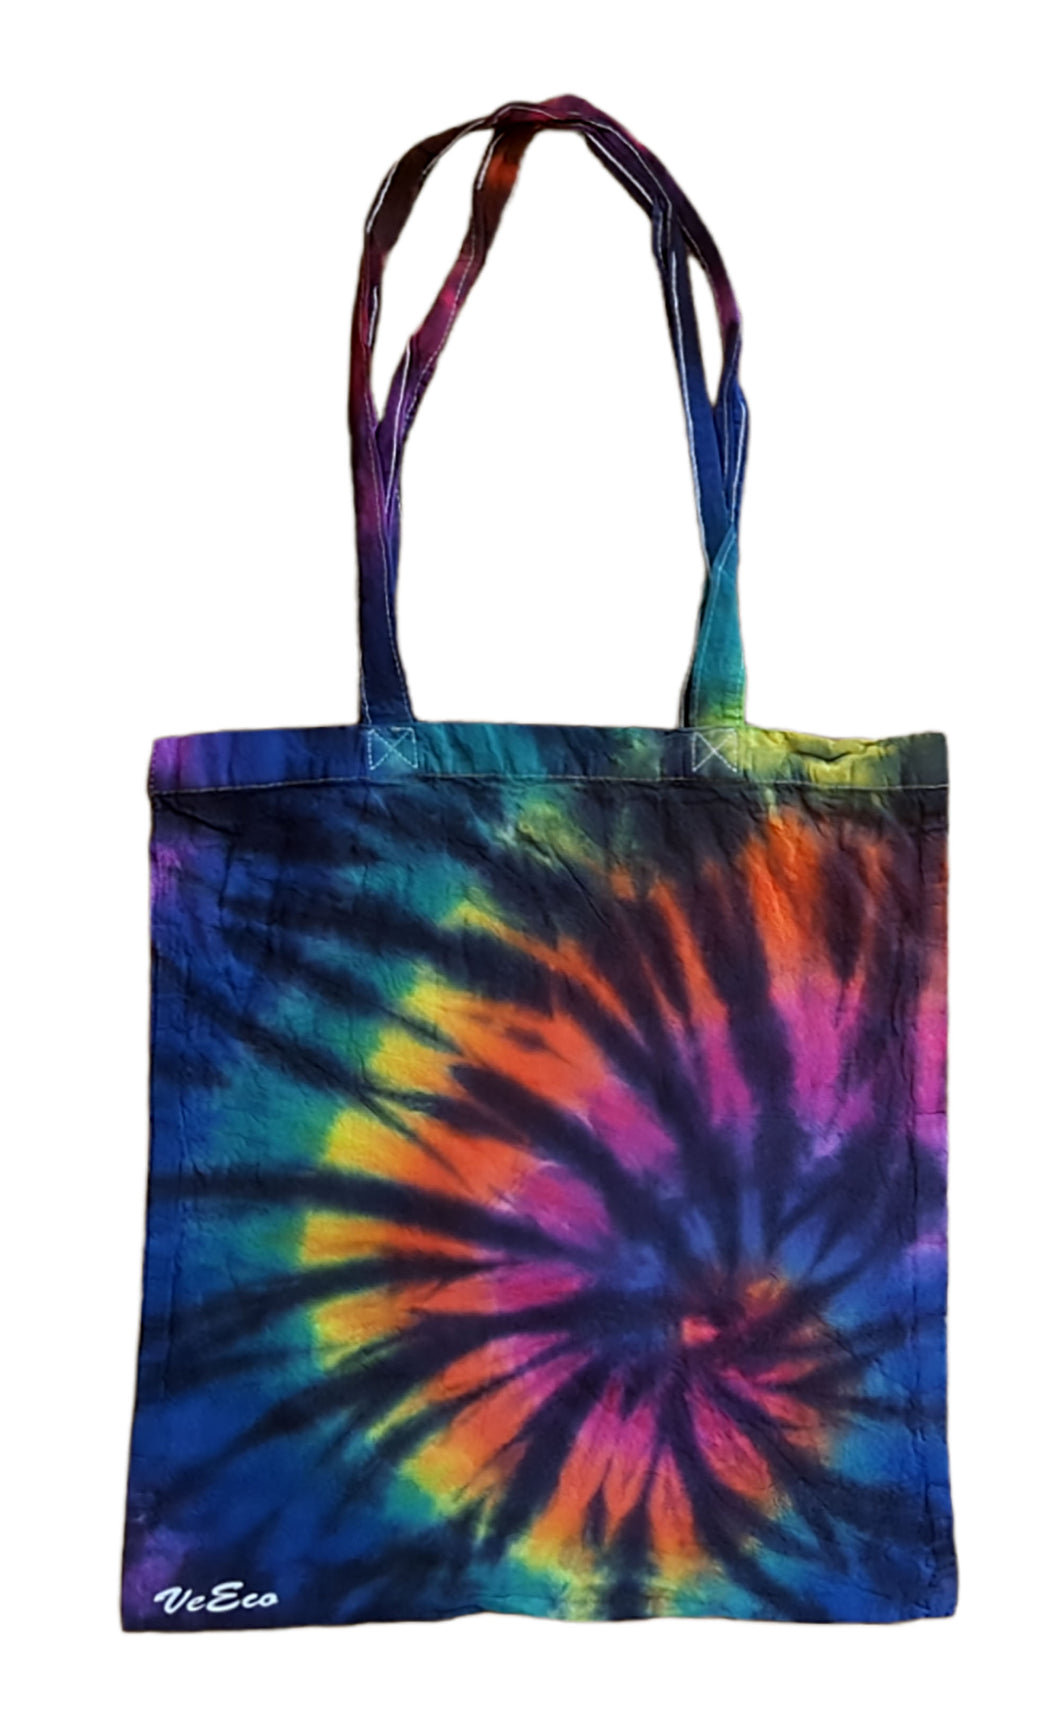 Gay Pride rainbow flag tote bag - Tie dye tote bag (One size) - Customisable Gay Pride flag colours